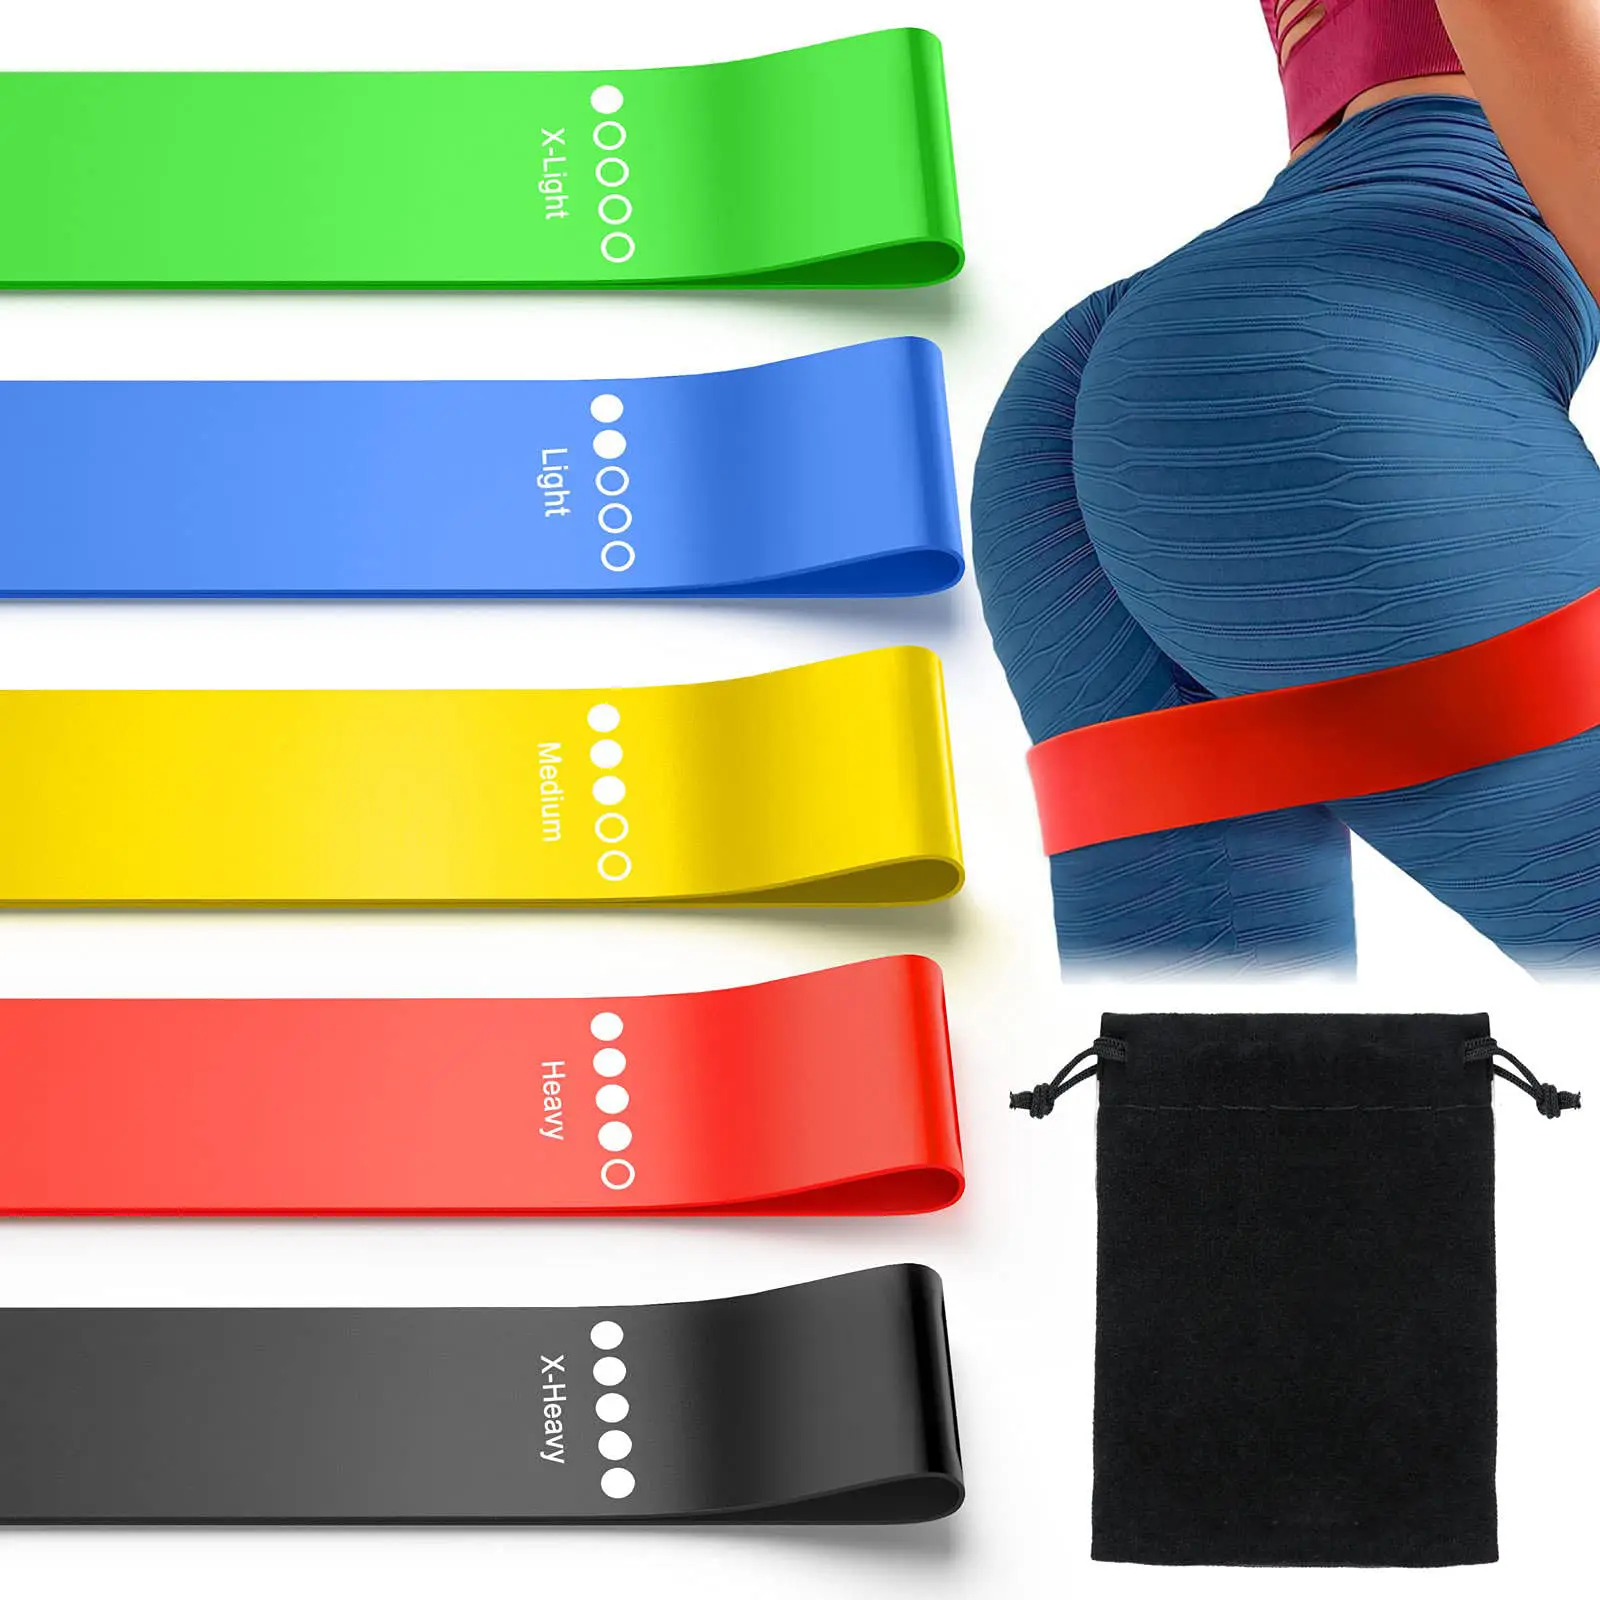 Best Eco-Friendly Pilates Band Exercise Accessories Stretch Resistance Loops for Home Exercise